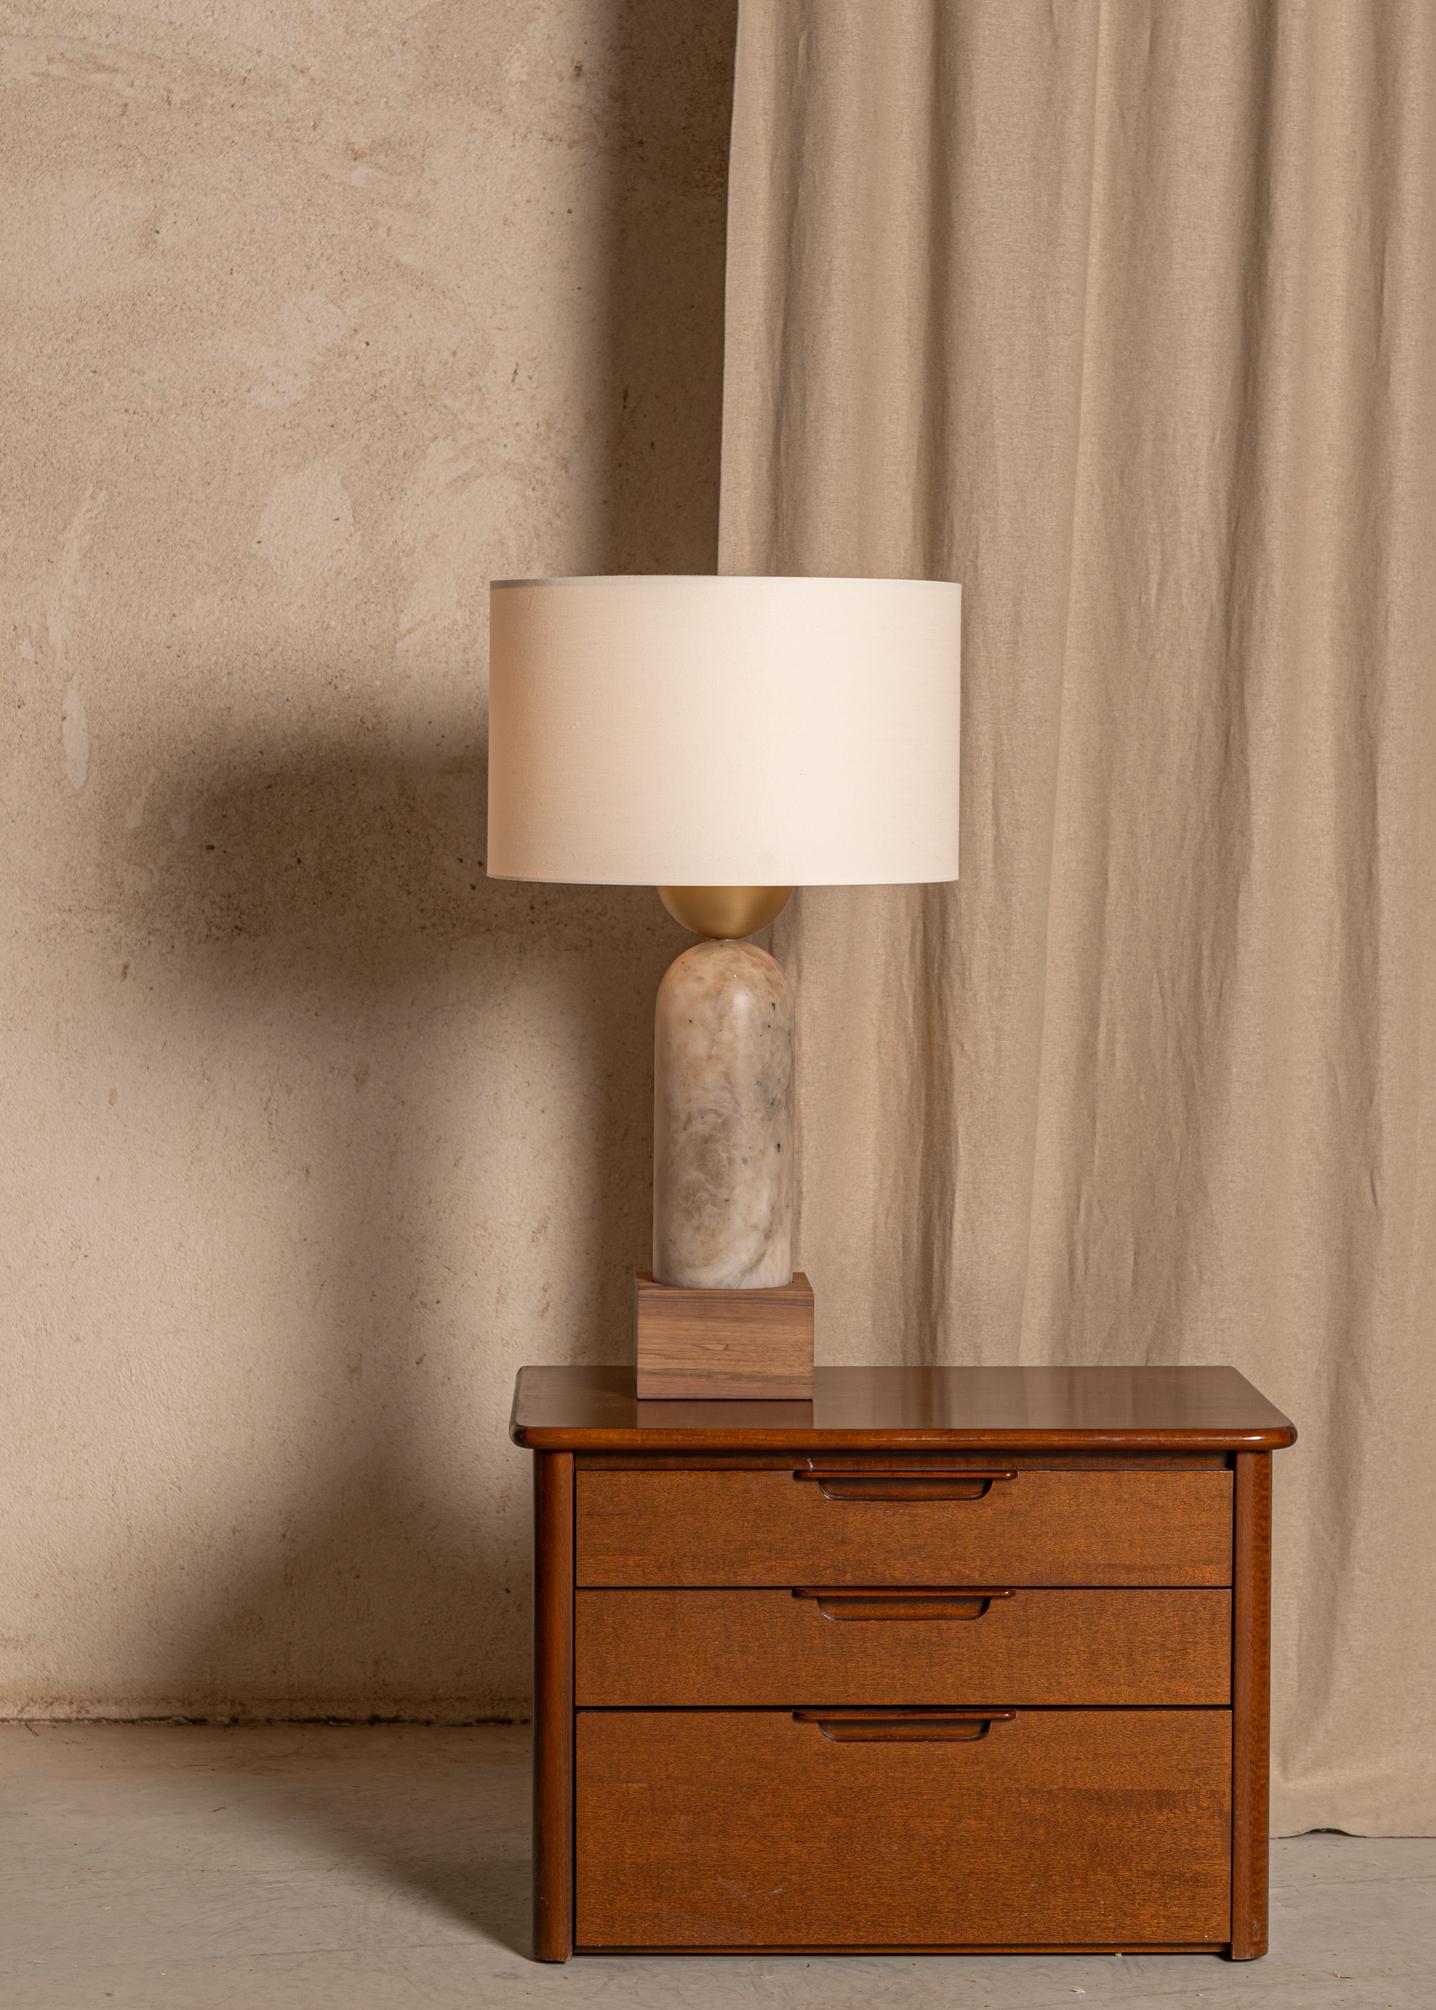 An elevated and elegant association of spherical lines to create a unique shape. Playing with materials and geometries to create contrast, the Peona table lamp merges perfectly in a modern or classical interior. Association of alabaster, marble or